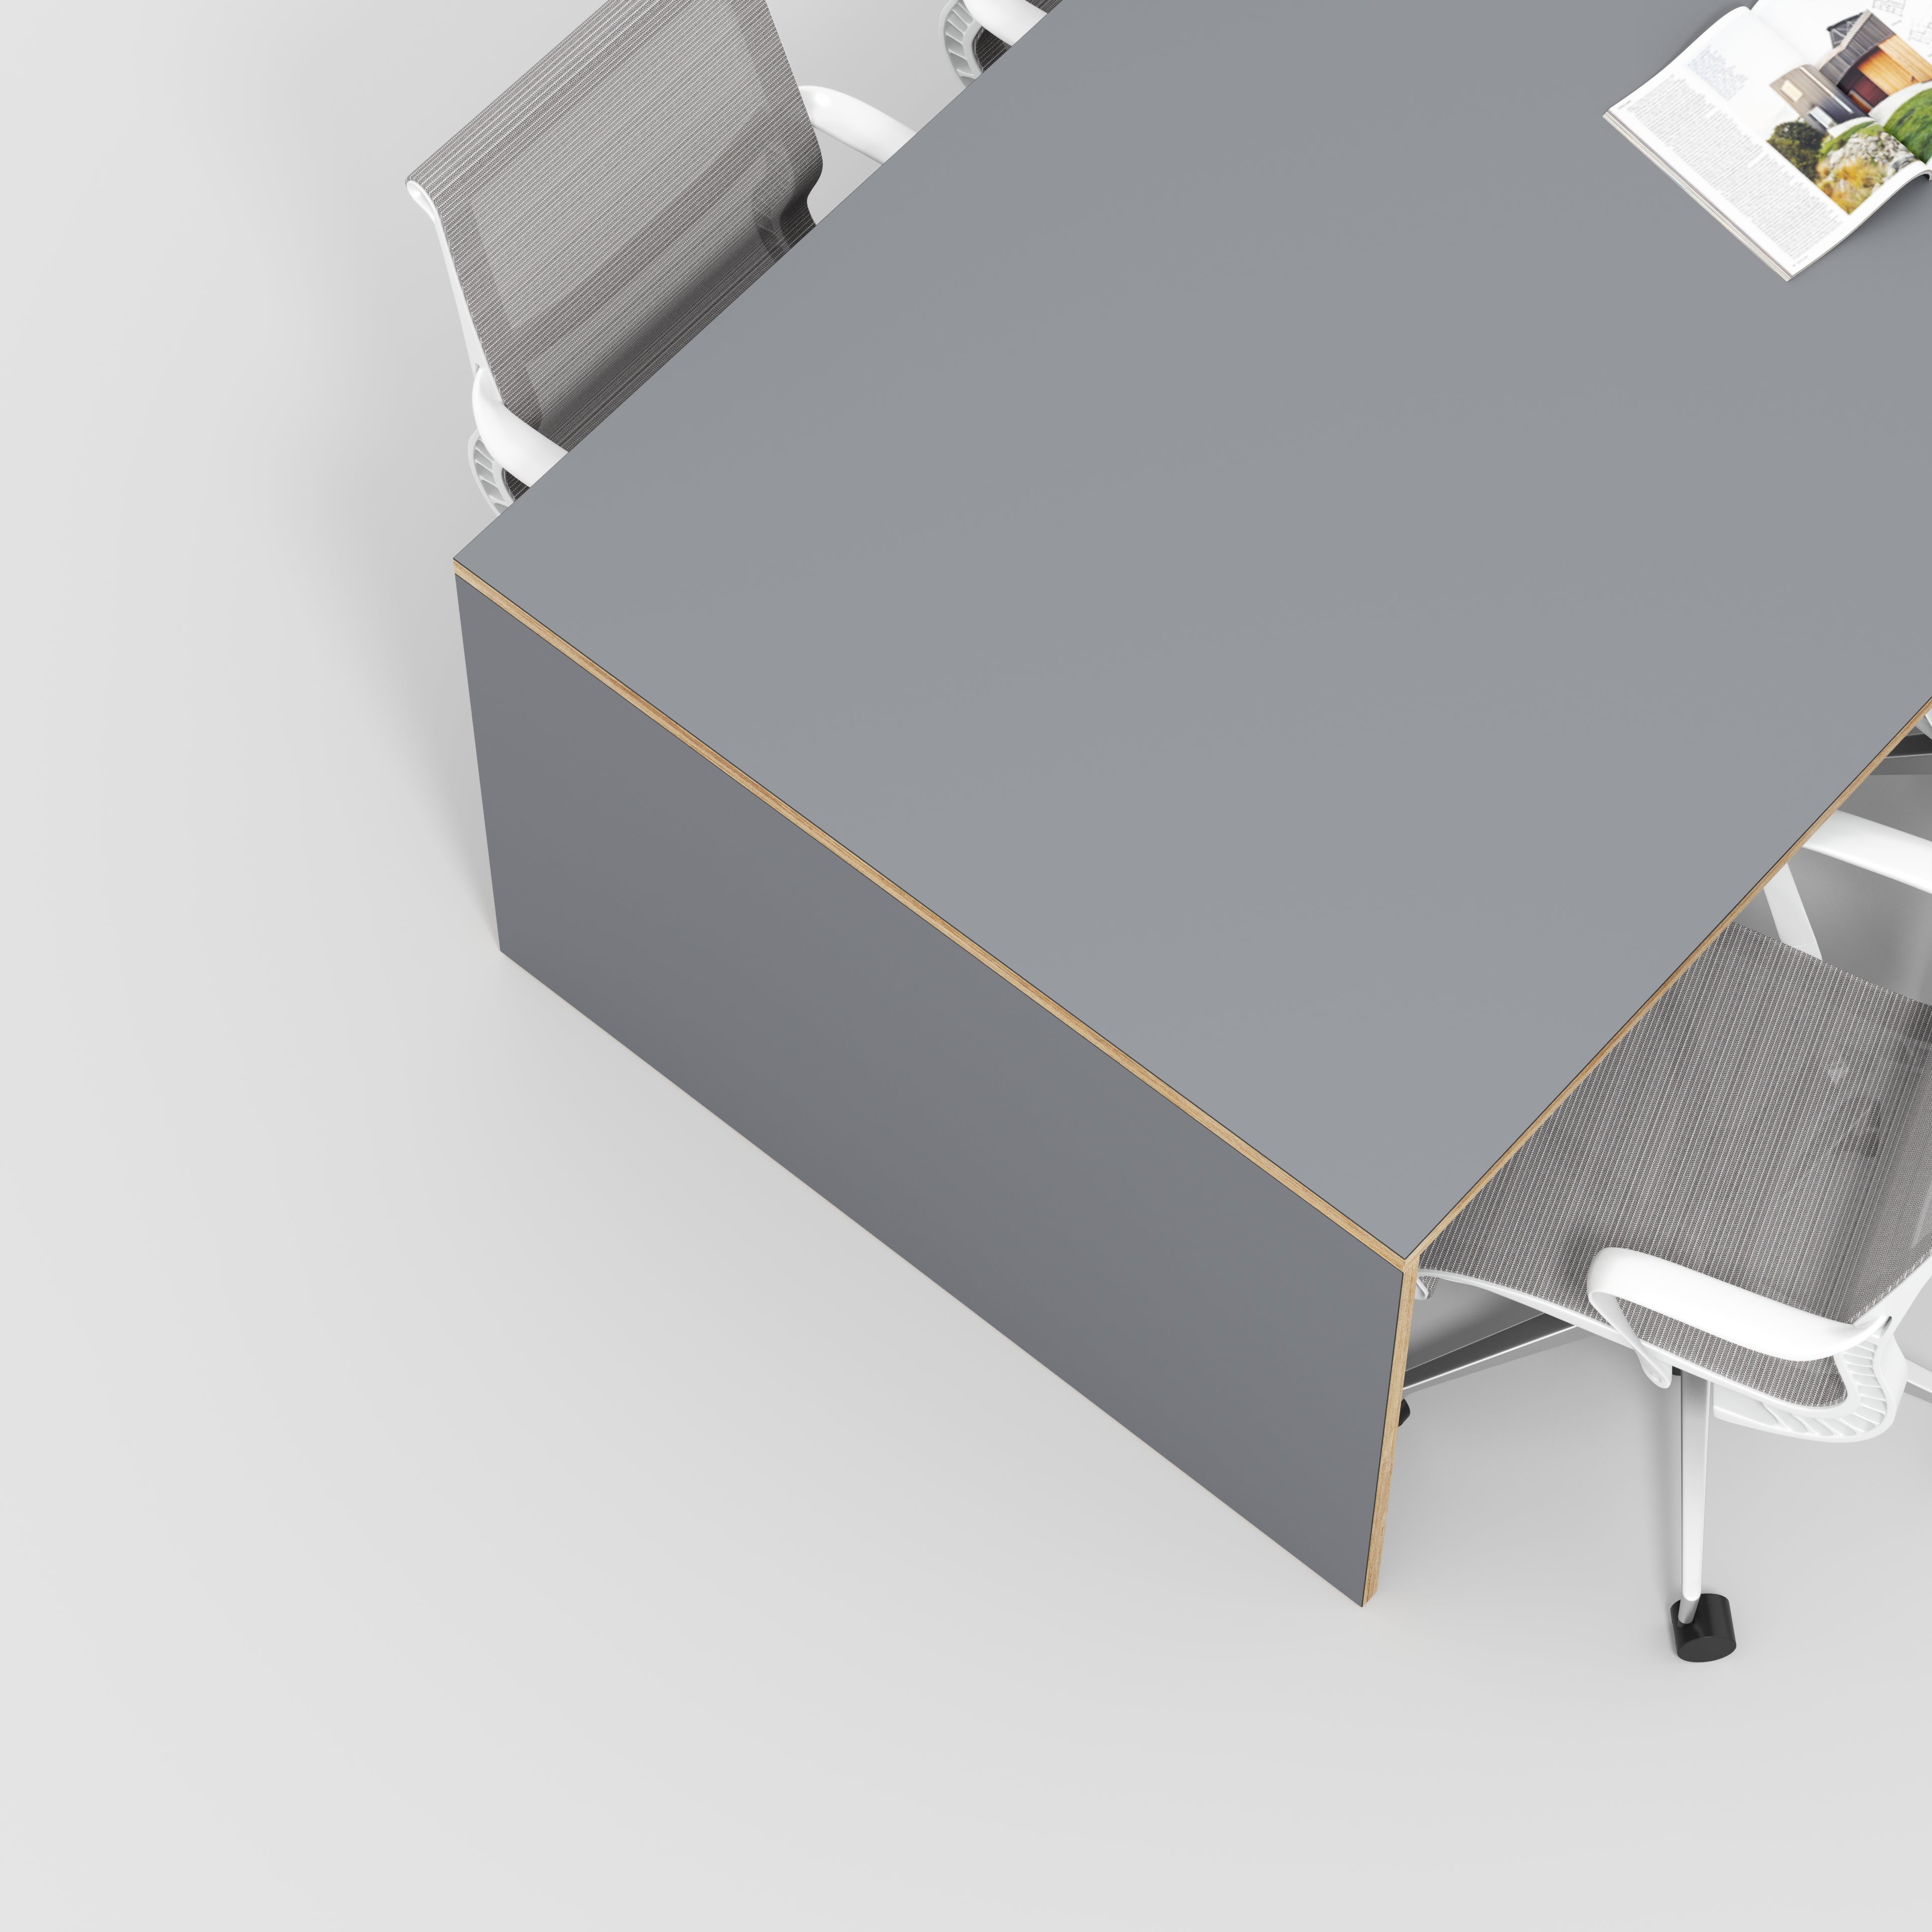 Table with Solid Sides - Formica Tornado Grey - 2400(w) x 1200(d) x 750(h)